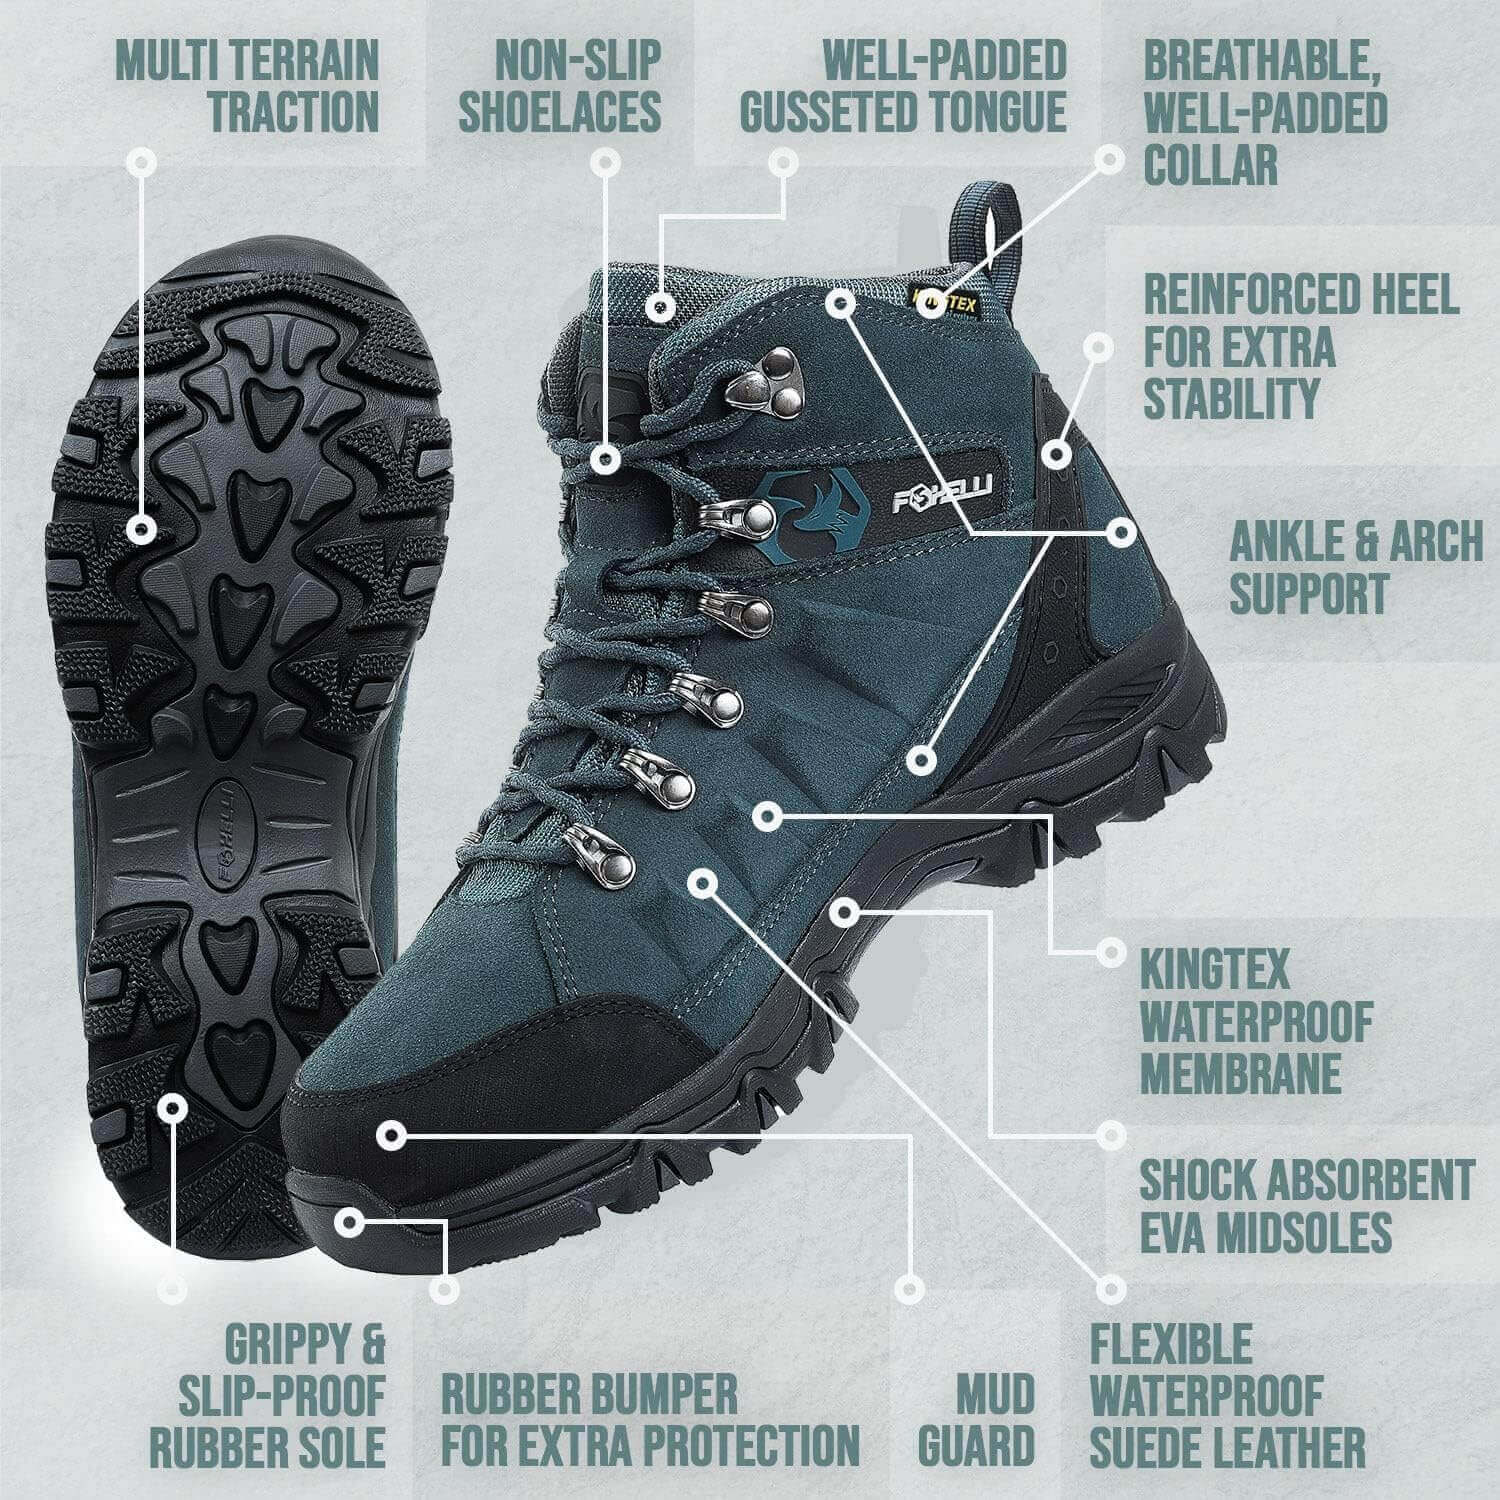 Shop The Latest >Foxelli Women’s Breathable, Waterproof Hiking Boots > *Only $161.96*> From The Top Brand > *Foxellil* > Shop Now and Get Free Shipping On Orders Over $45.00 >*Shop Earth Foot*